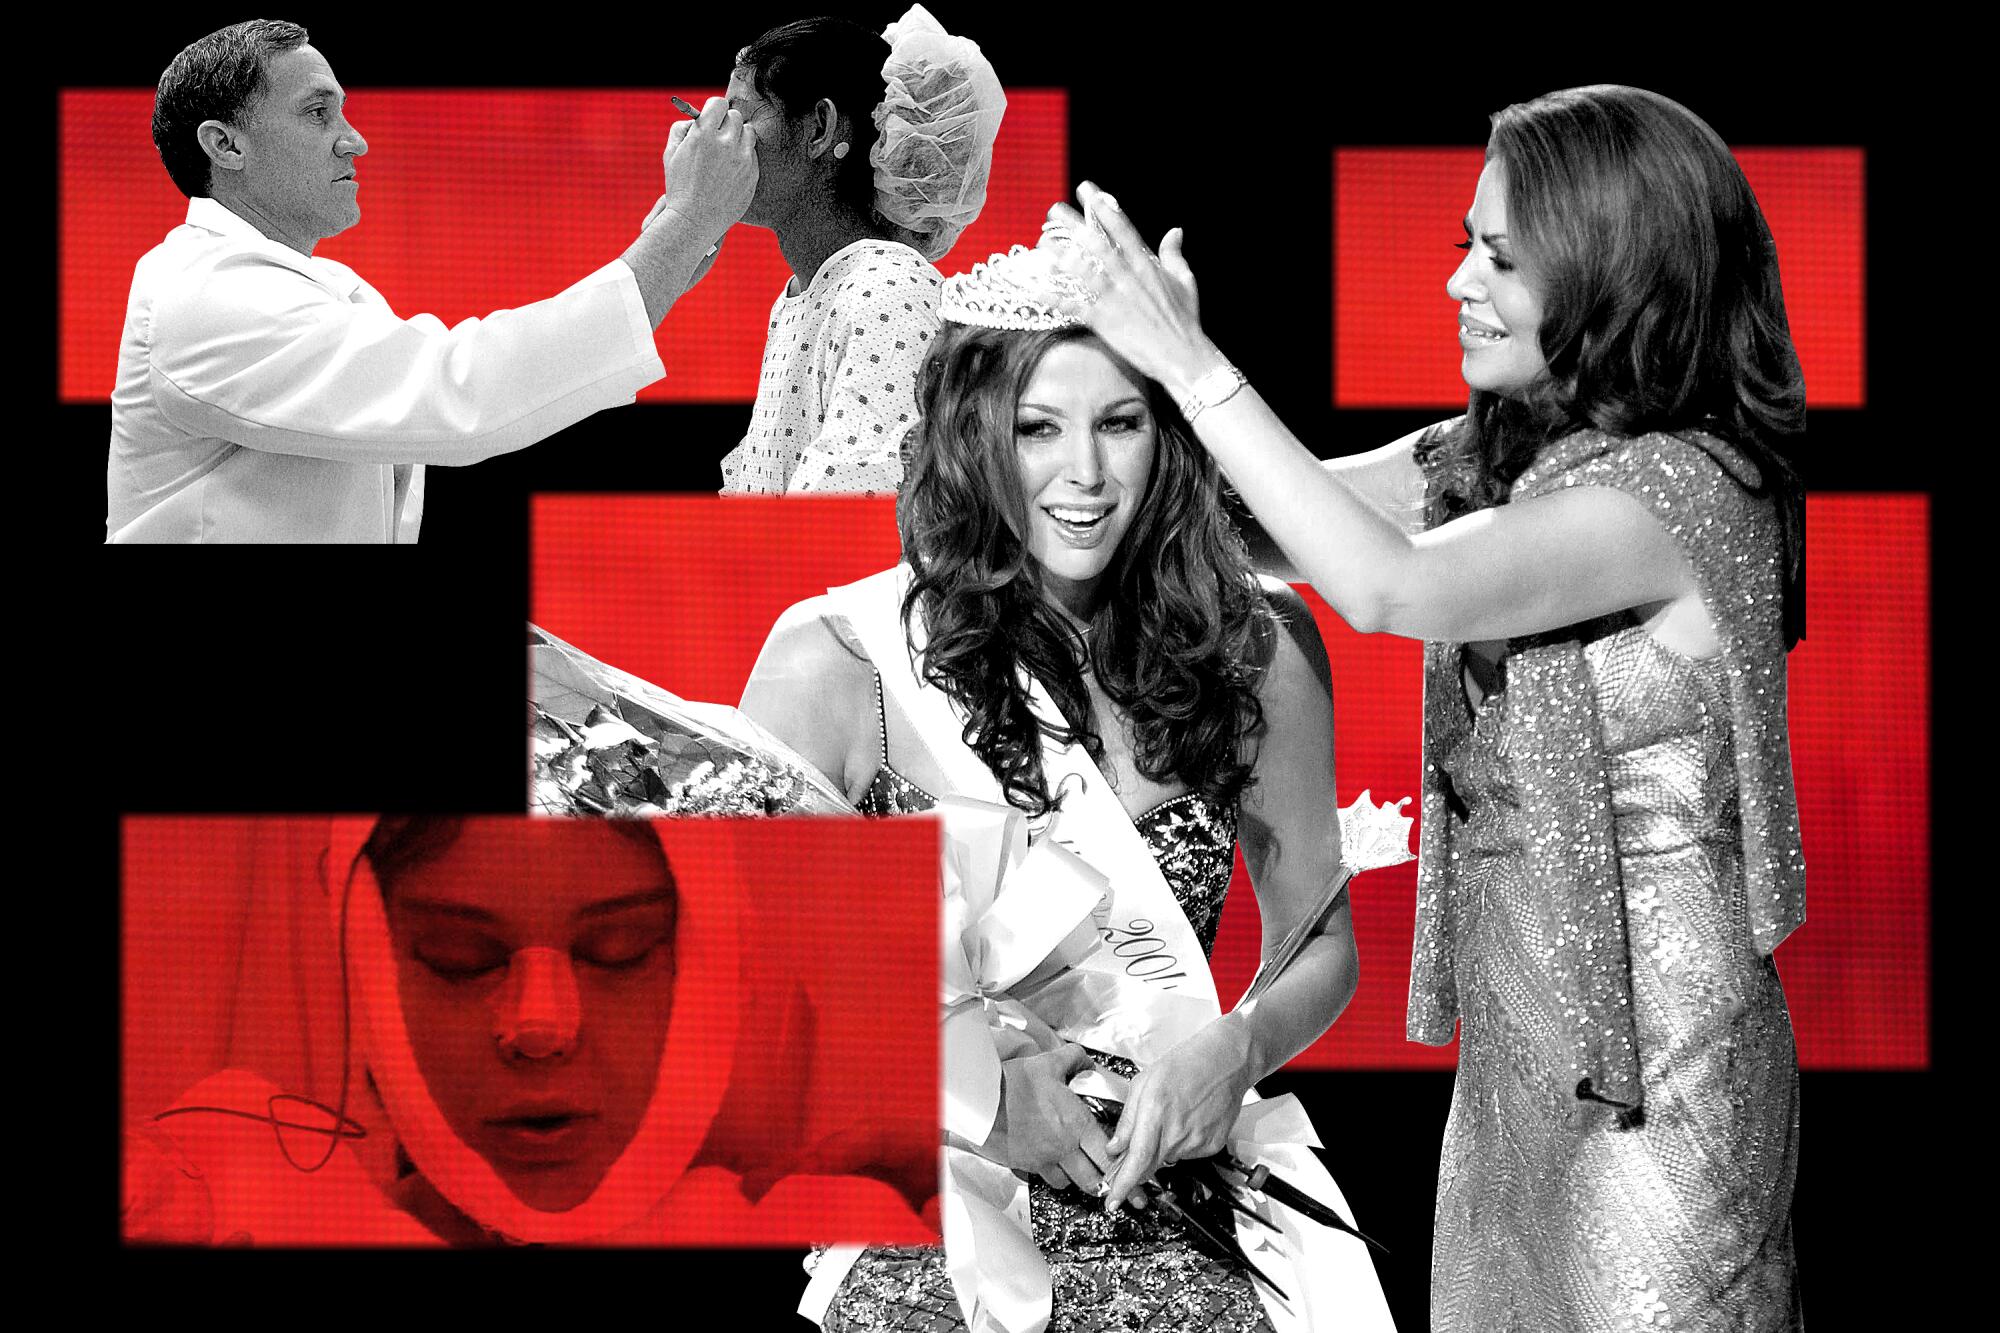 A graphic with red squares and black and white photos of a doctor, a patient, a woman in bandages and woman being crowned.